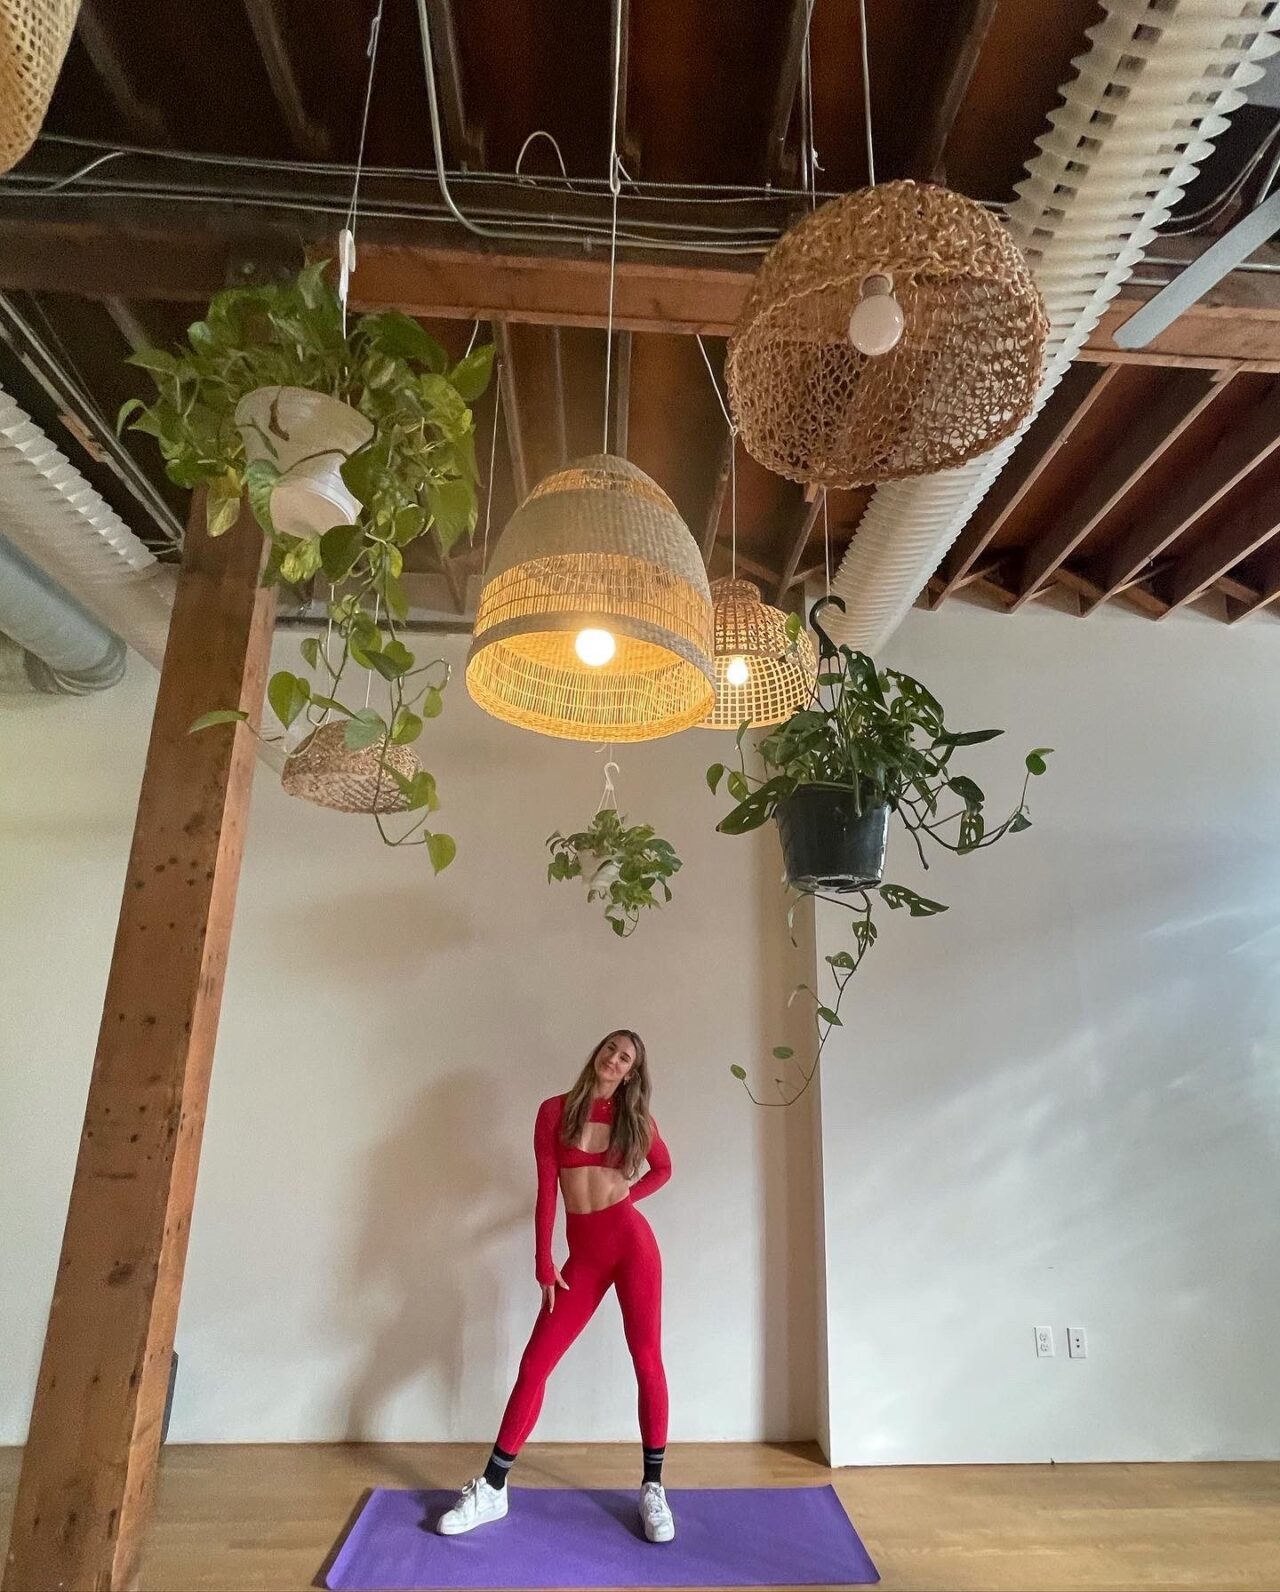 Woman in athletic wear posing under hanging plants and lamps